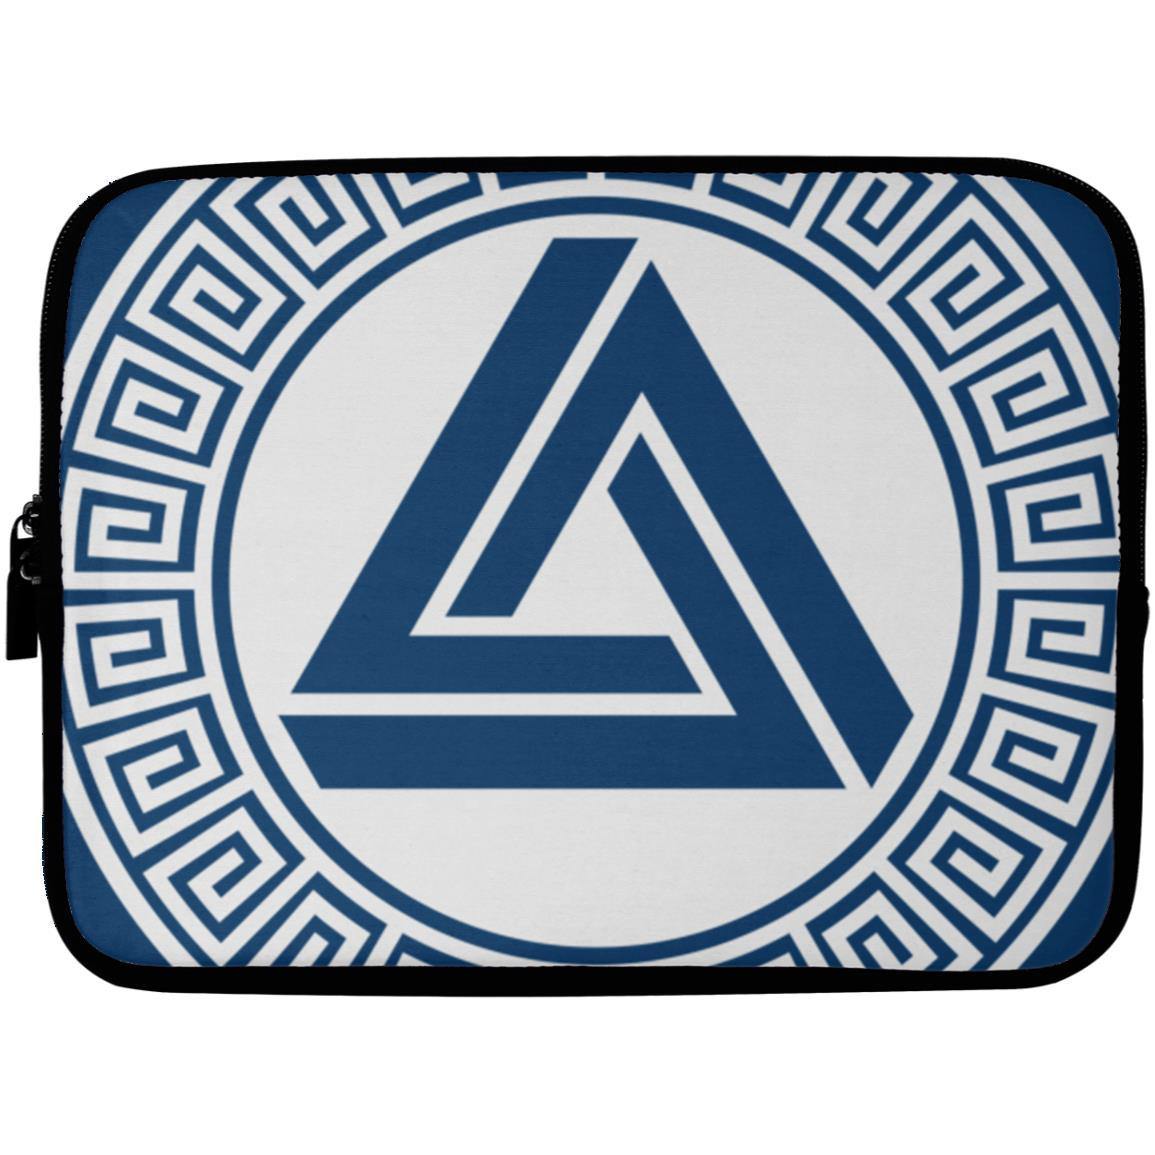 Crop Circle Laptop Sleeve - Waden Hill - Shapes of Wisdom